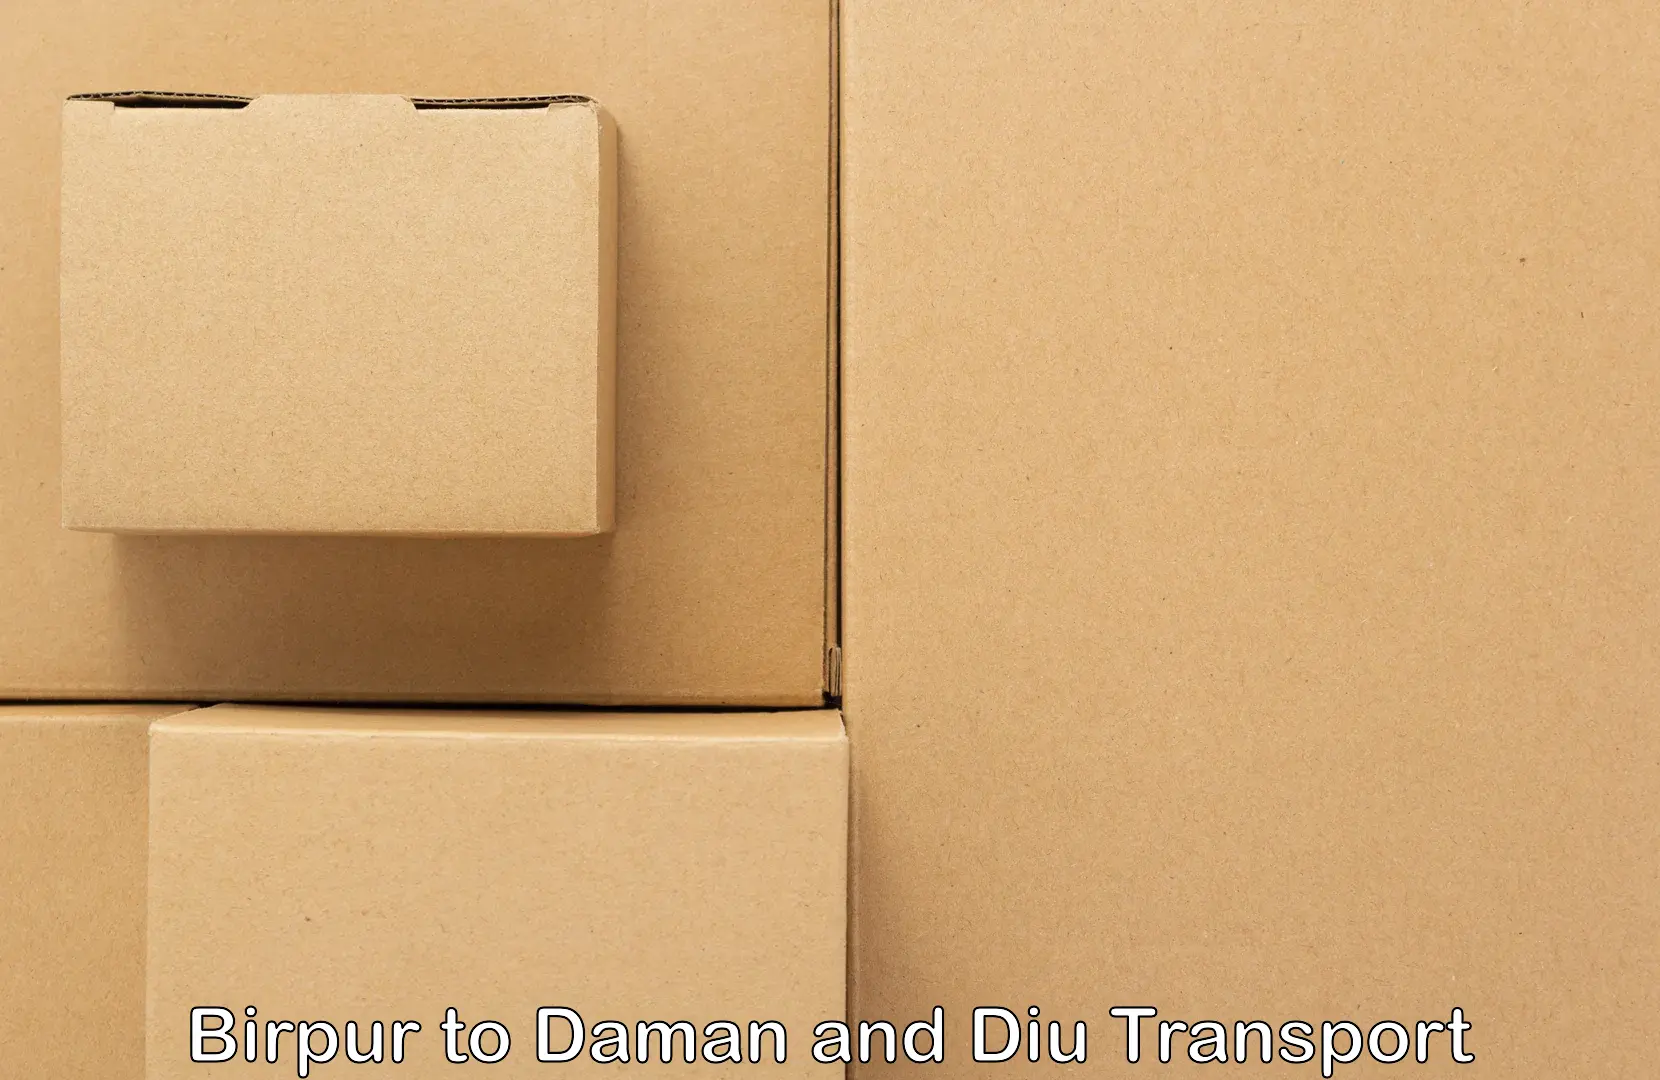 Air freight transport services in Birpur to Daman and Diu